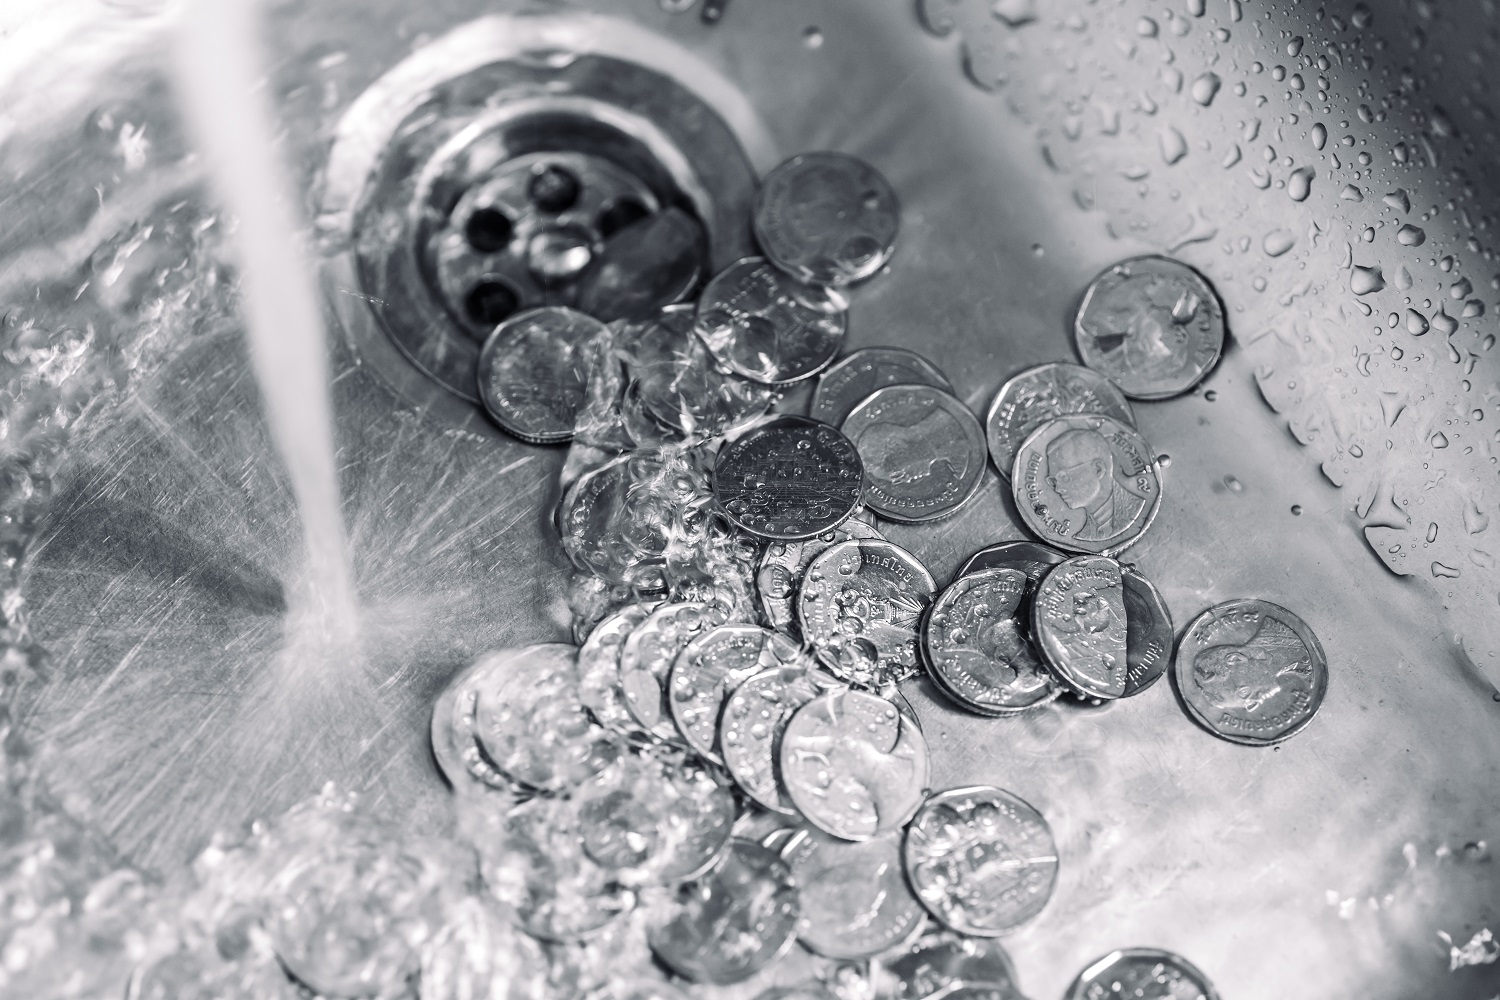 Silver coins being washed in a sink